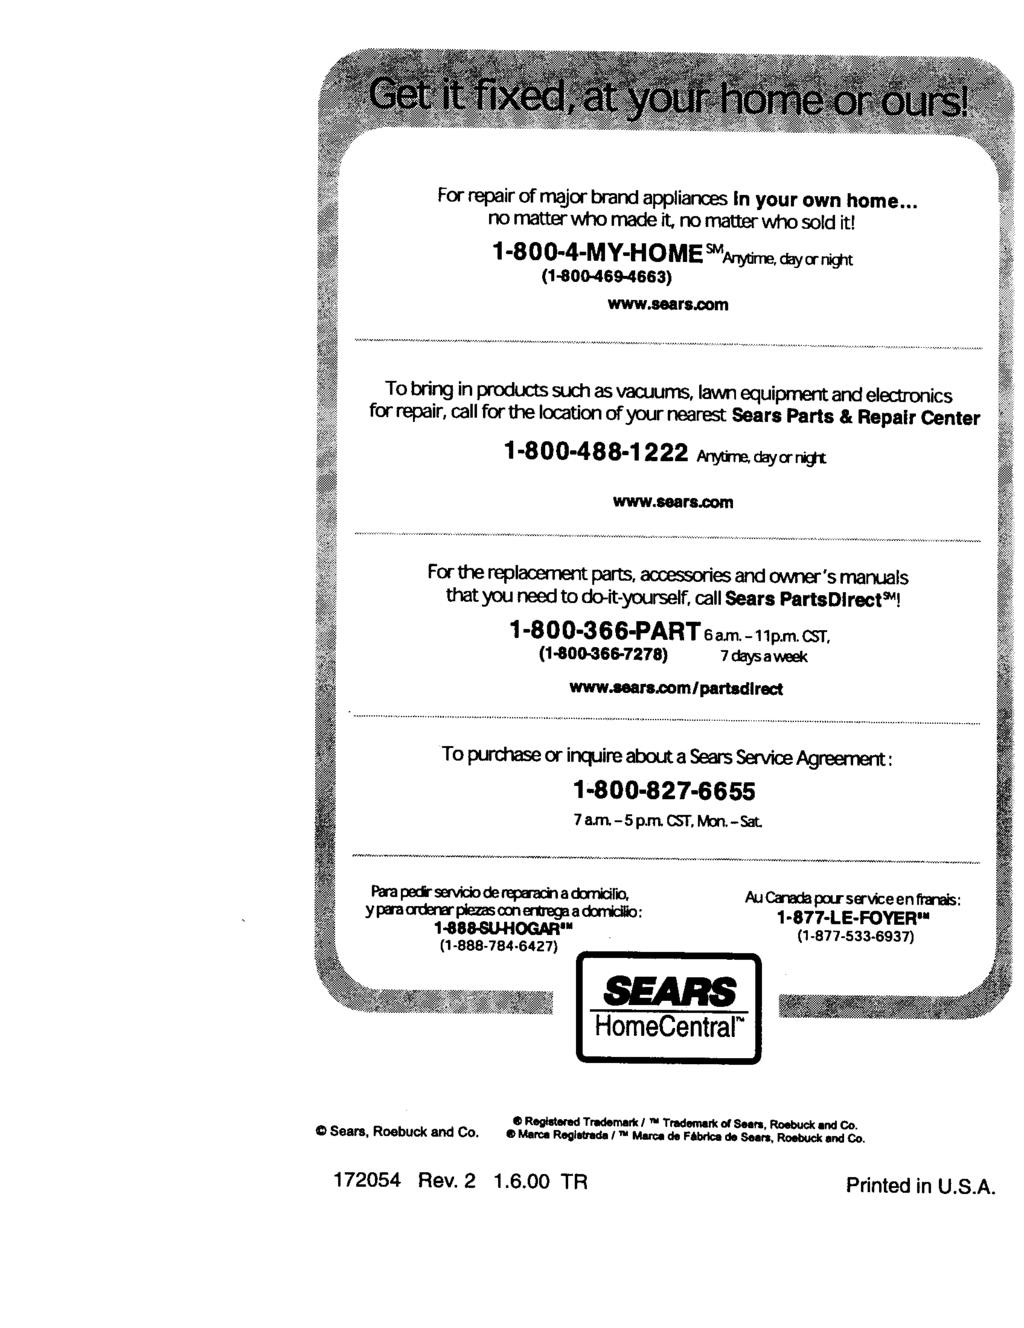 For repair of major brand appliances In your own home... no marlerwho made _, no maier who sold it! 1-800-4-MY-H OME sm_, c_o_._j_t (1-800-469-4663) www.sears.